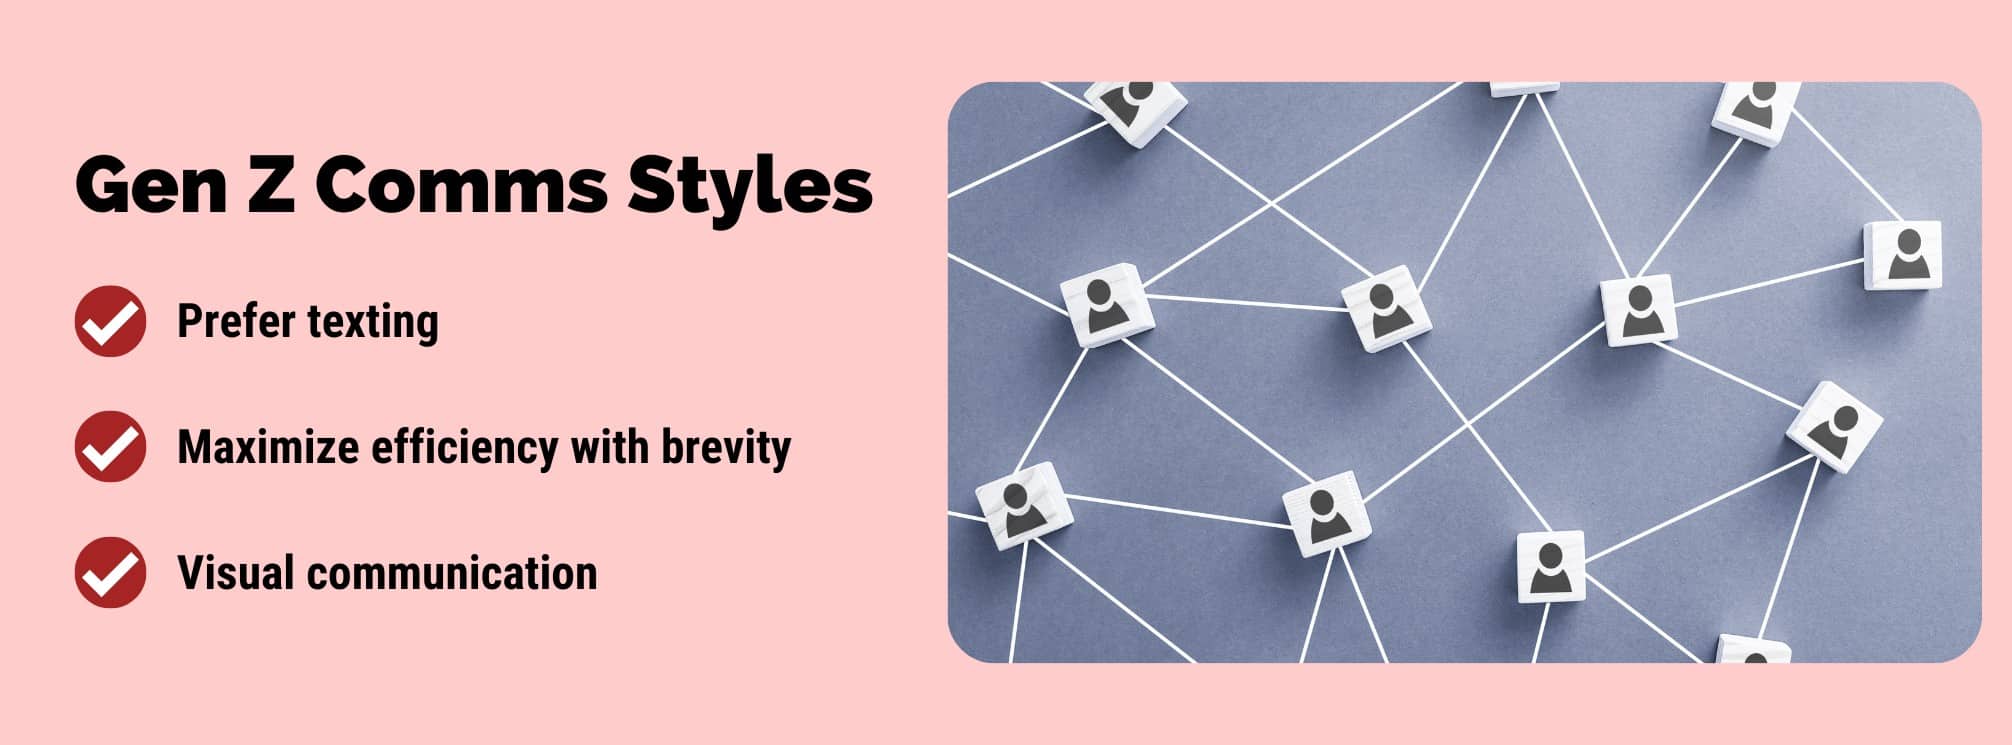 graphic that says "Gen Z comms styles" with an image of wooden blocks connected by lines